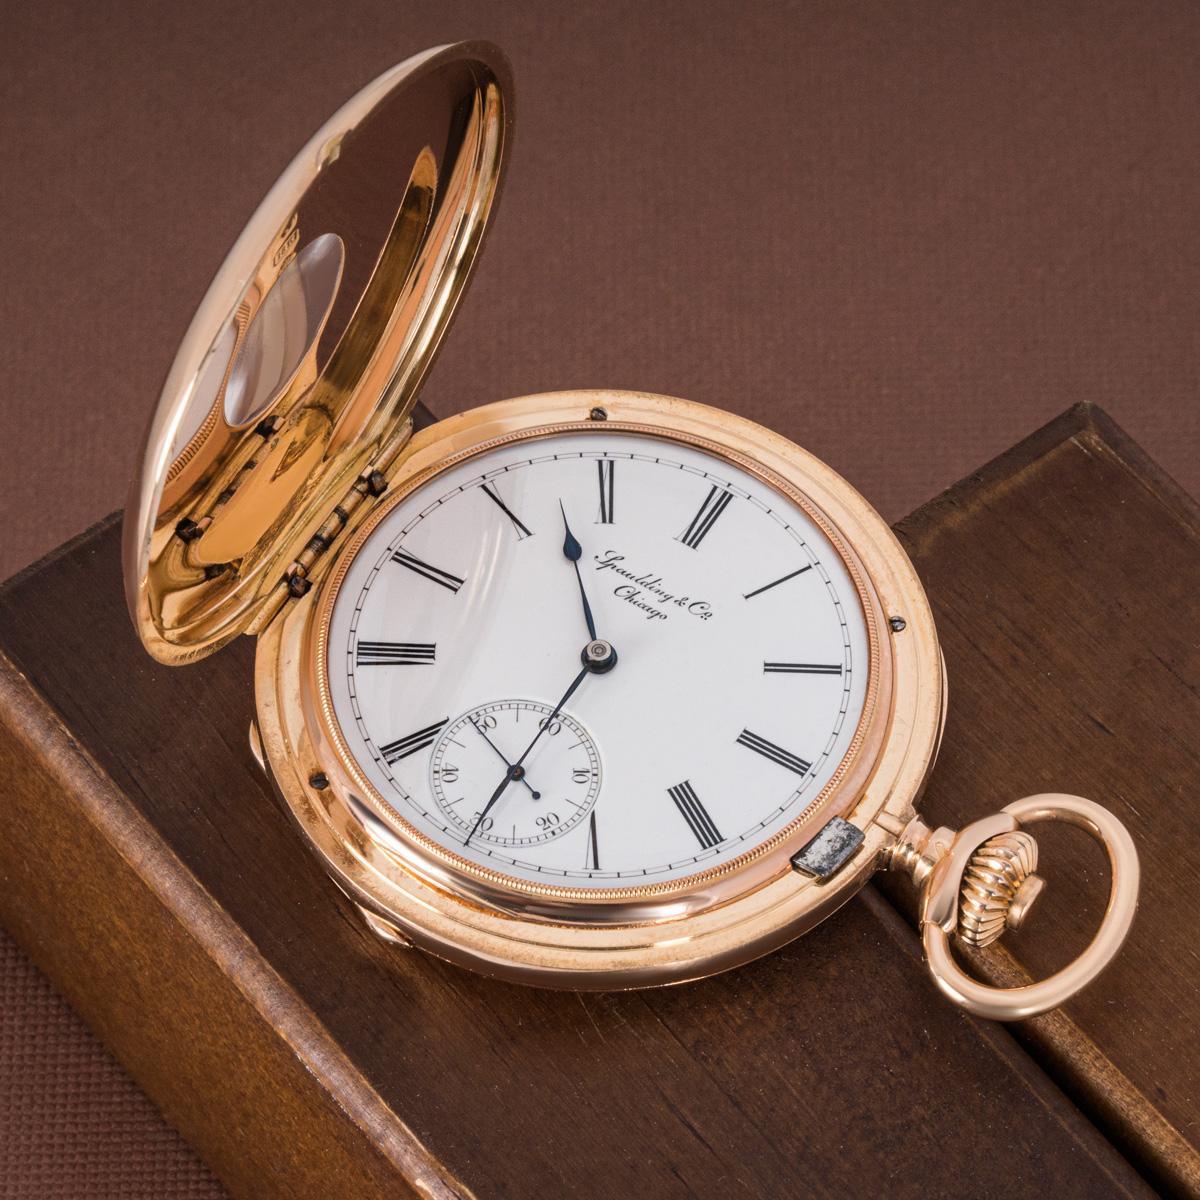 Patek Philippe.An 18ct Rose Gold Double Name Spaulding & Co Half Hunter Keyless Lever Pocket Watch C1888.

Dial: The crisp white enamel Roman dial with outer minute track and subsidiary dial at six o' clock, signed Spaulding & Co Chicago. The